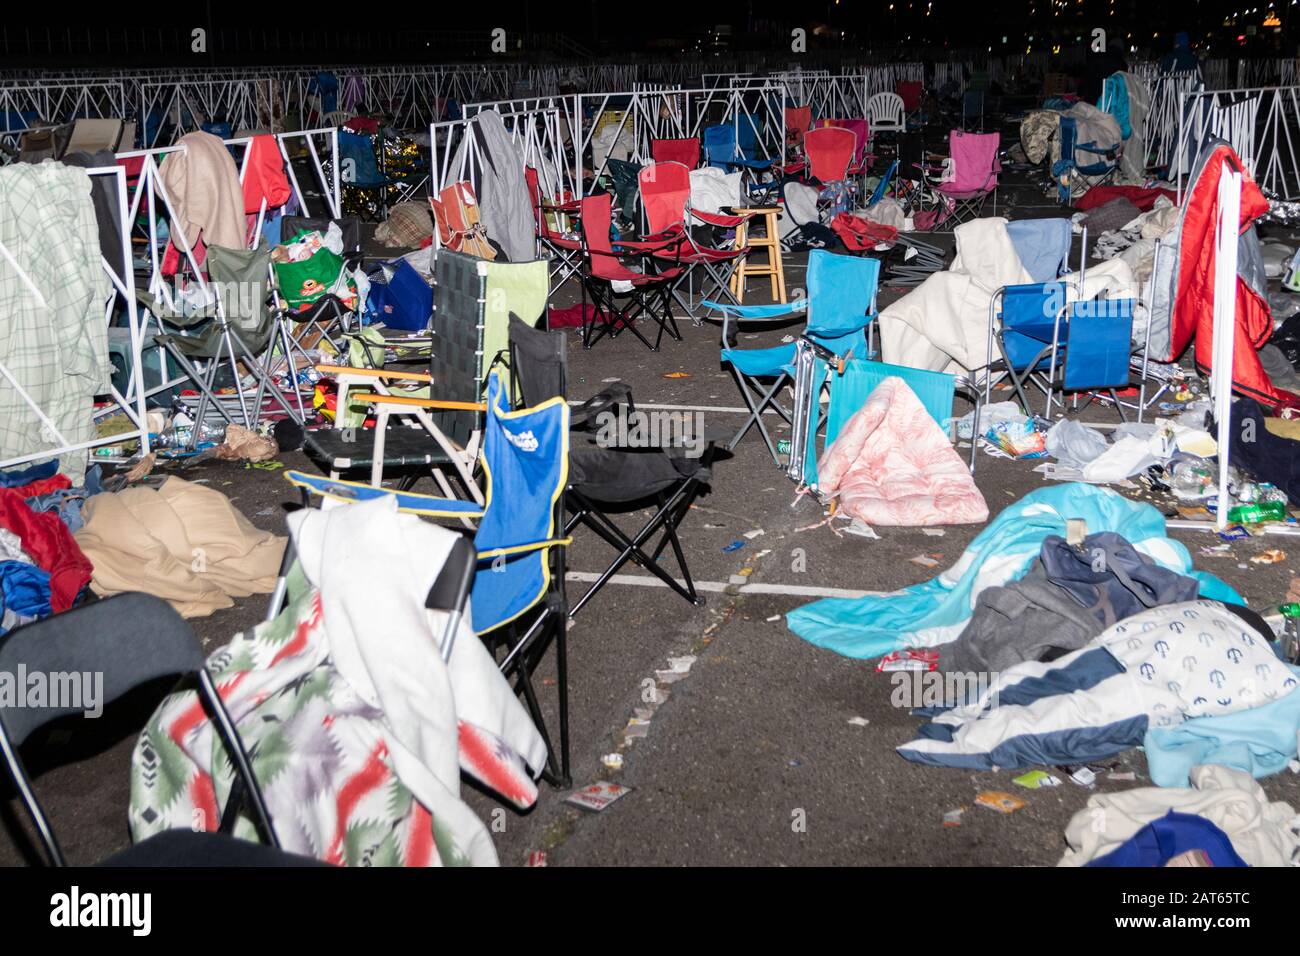 Chairs, blankets, and garbage left behind in the waiting and overflow area of the 'Keep America Great' rally; as seen after the event's completion. Stock Photo